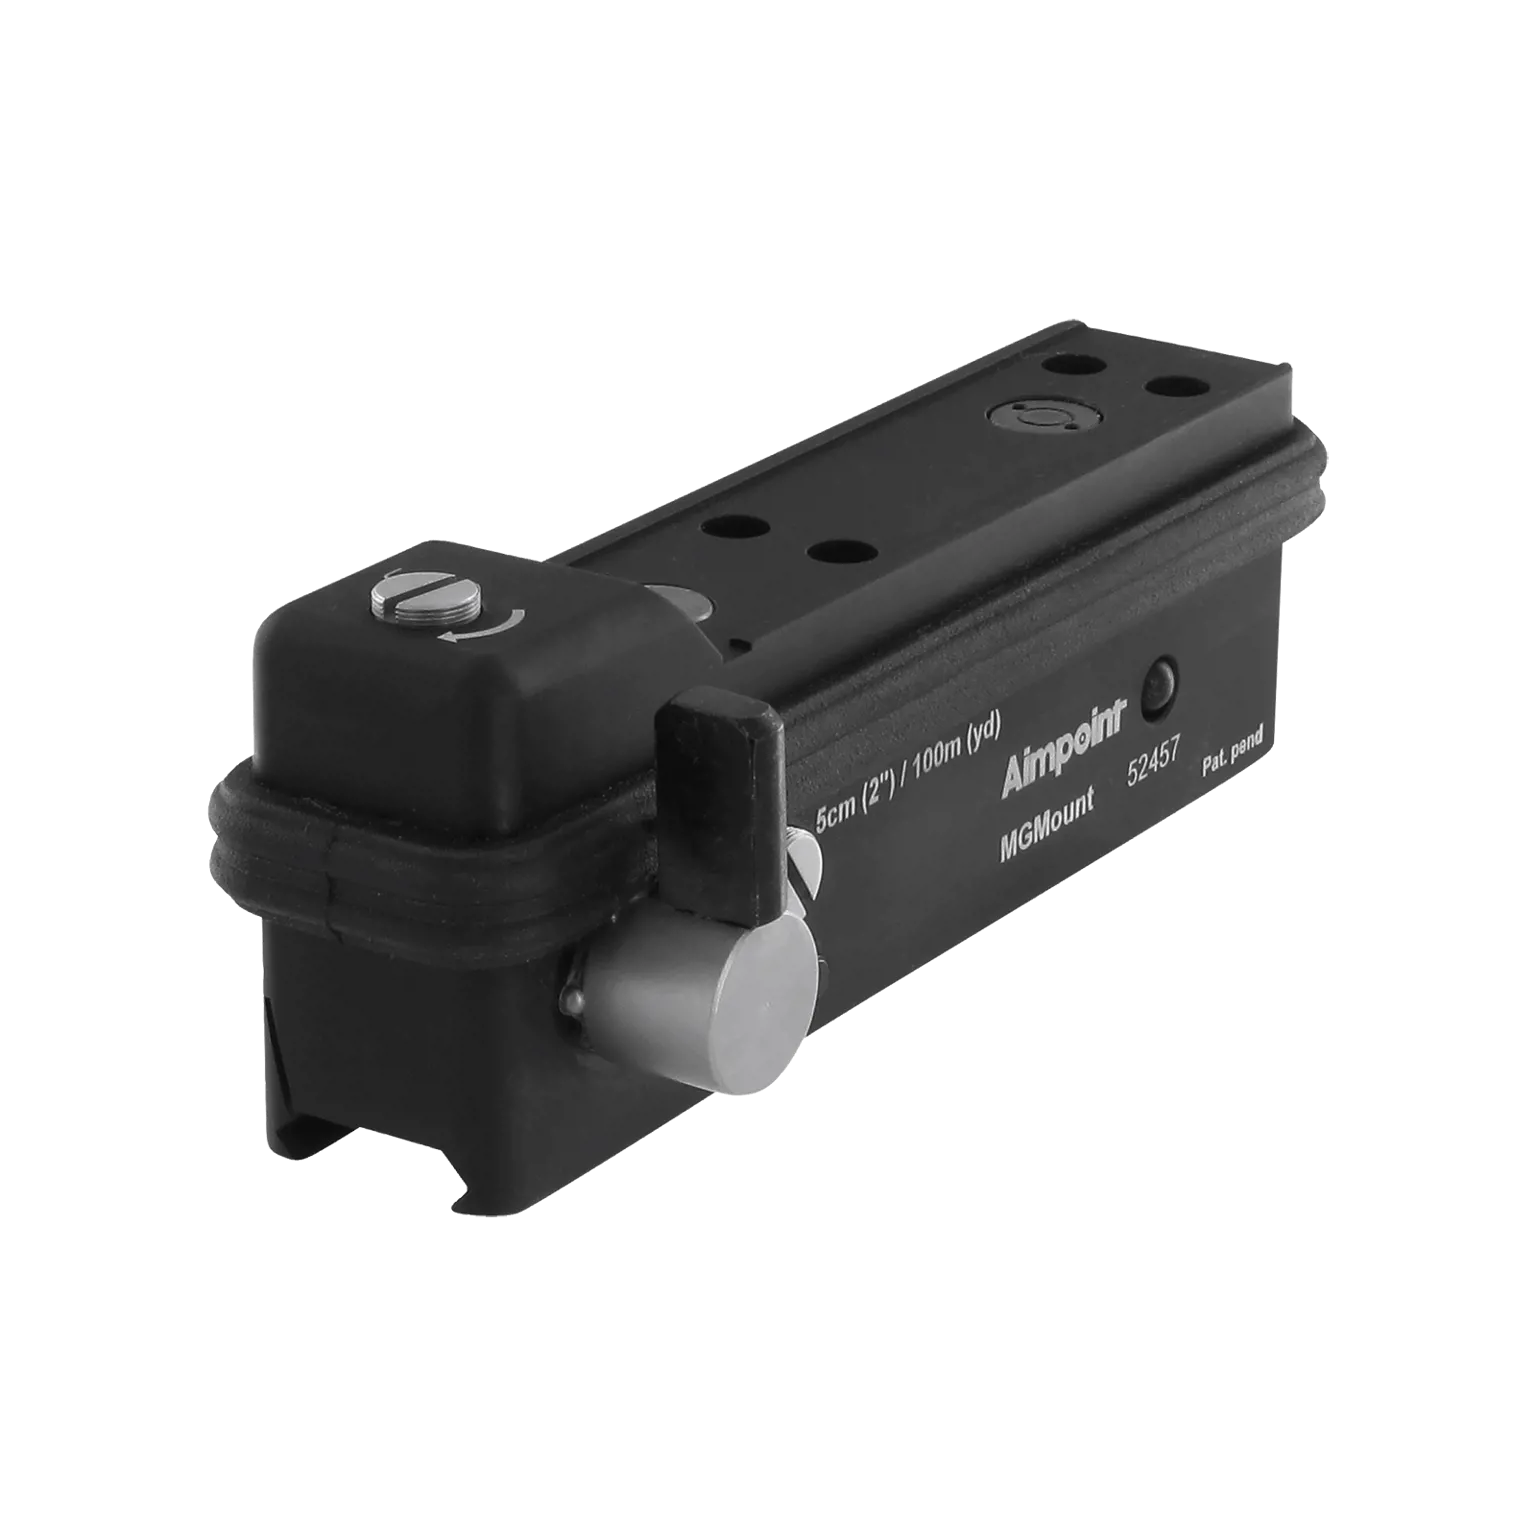 MGMount .50 Ballistic compensation base for Aimpoint® MPS3 - 1